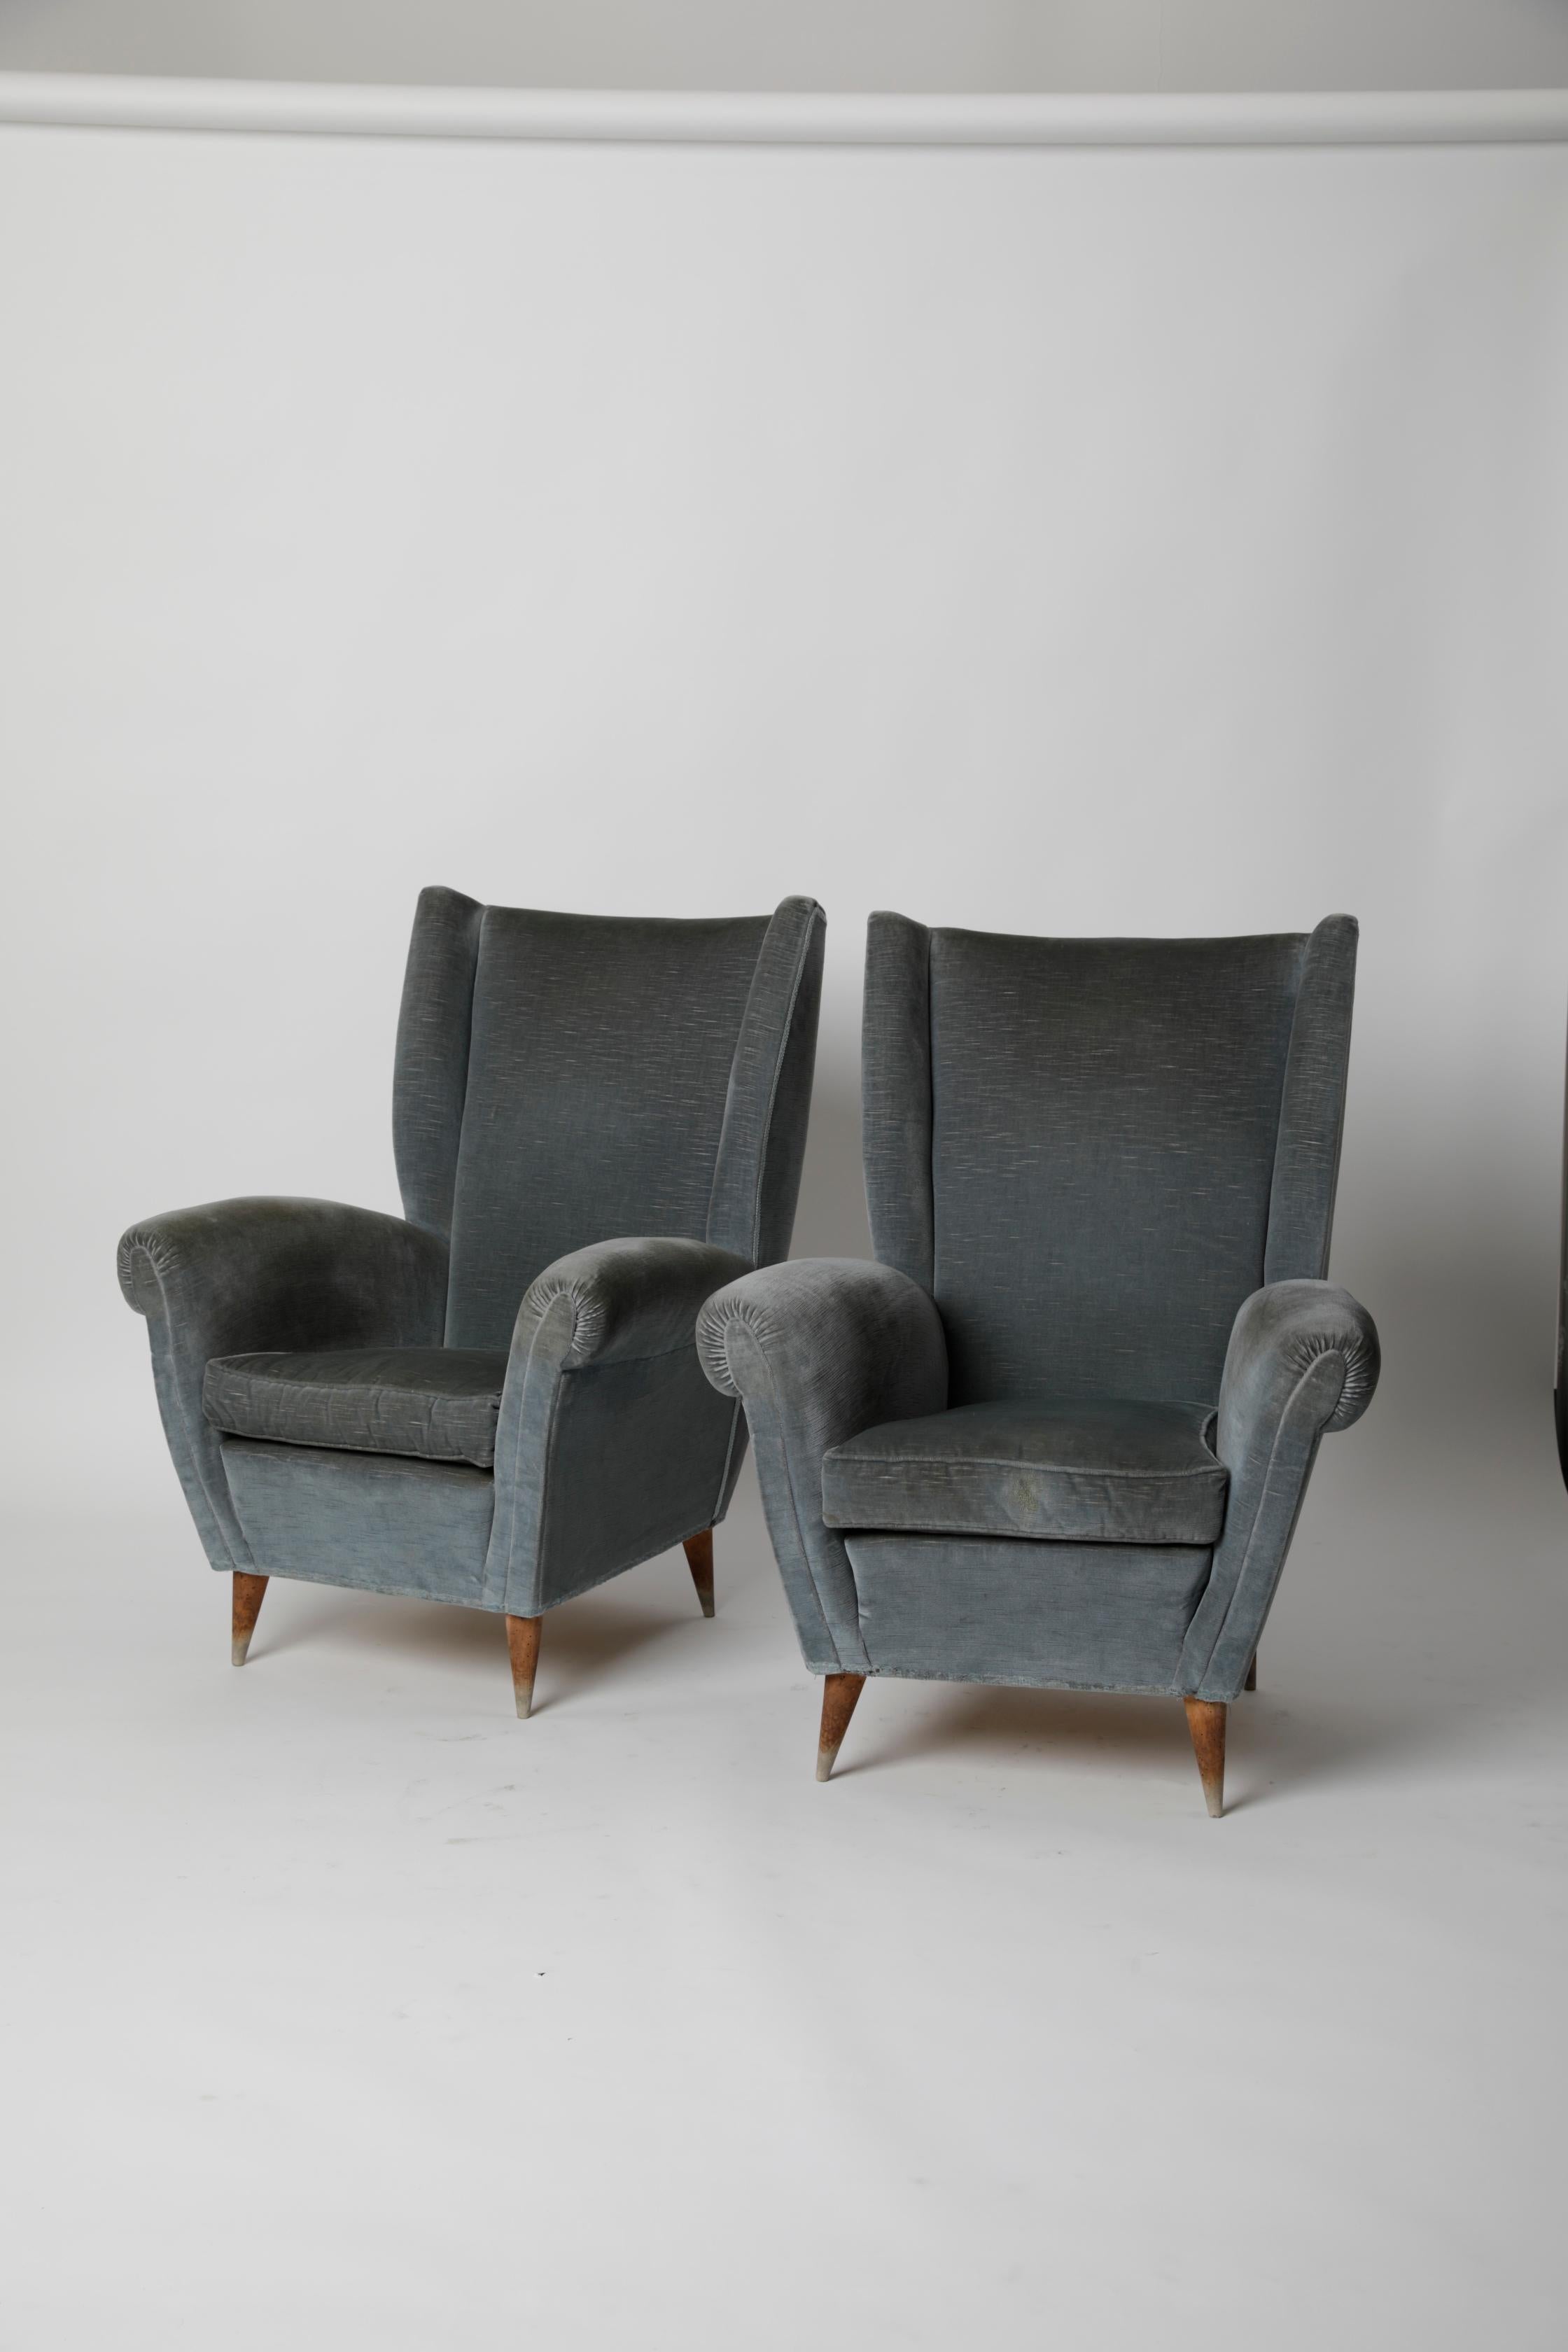 Mid-Century Modern Pair of Italian Mid Century Lounge Chairs by Gio Ponti Attr. for I.S.A. Bergamo